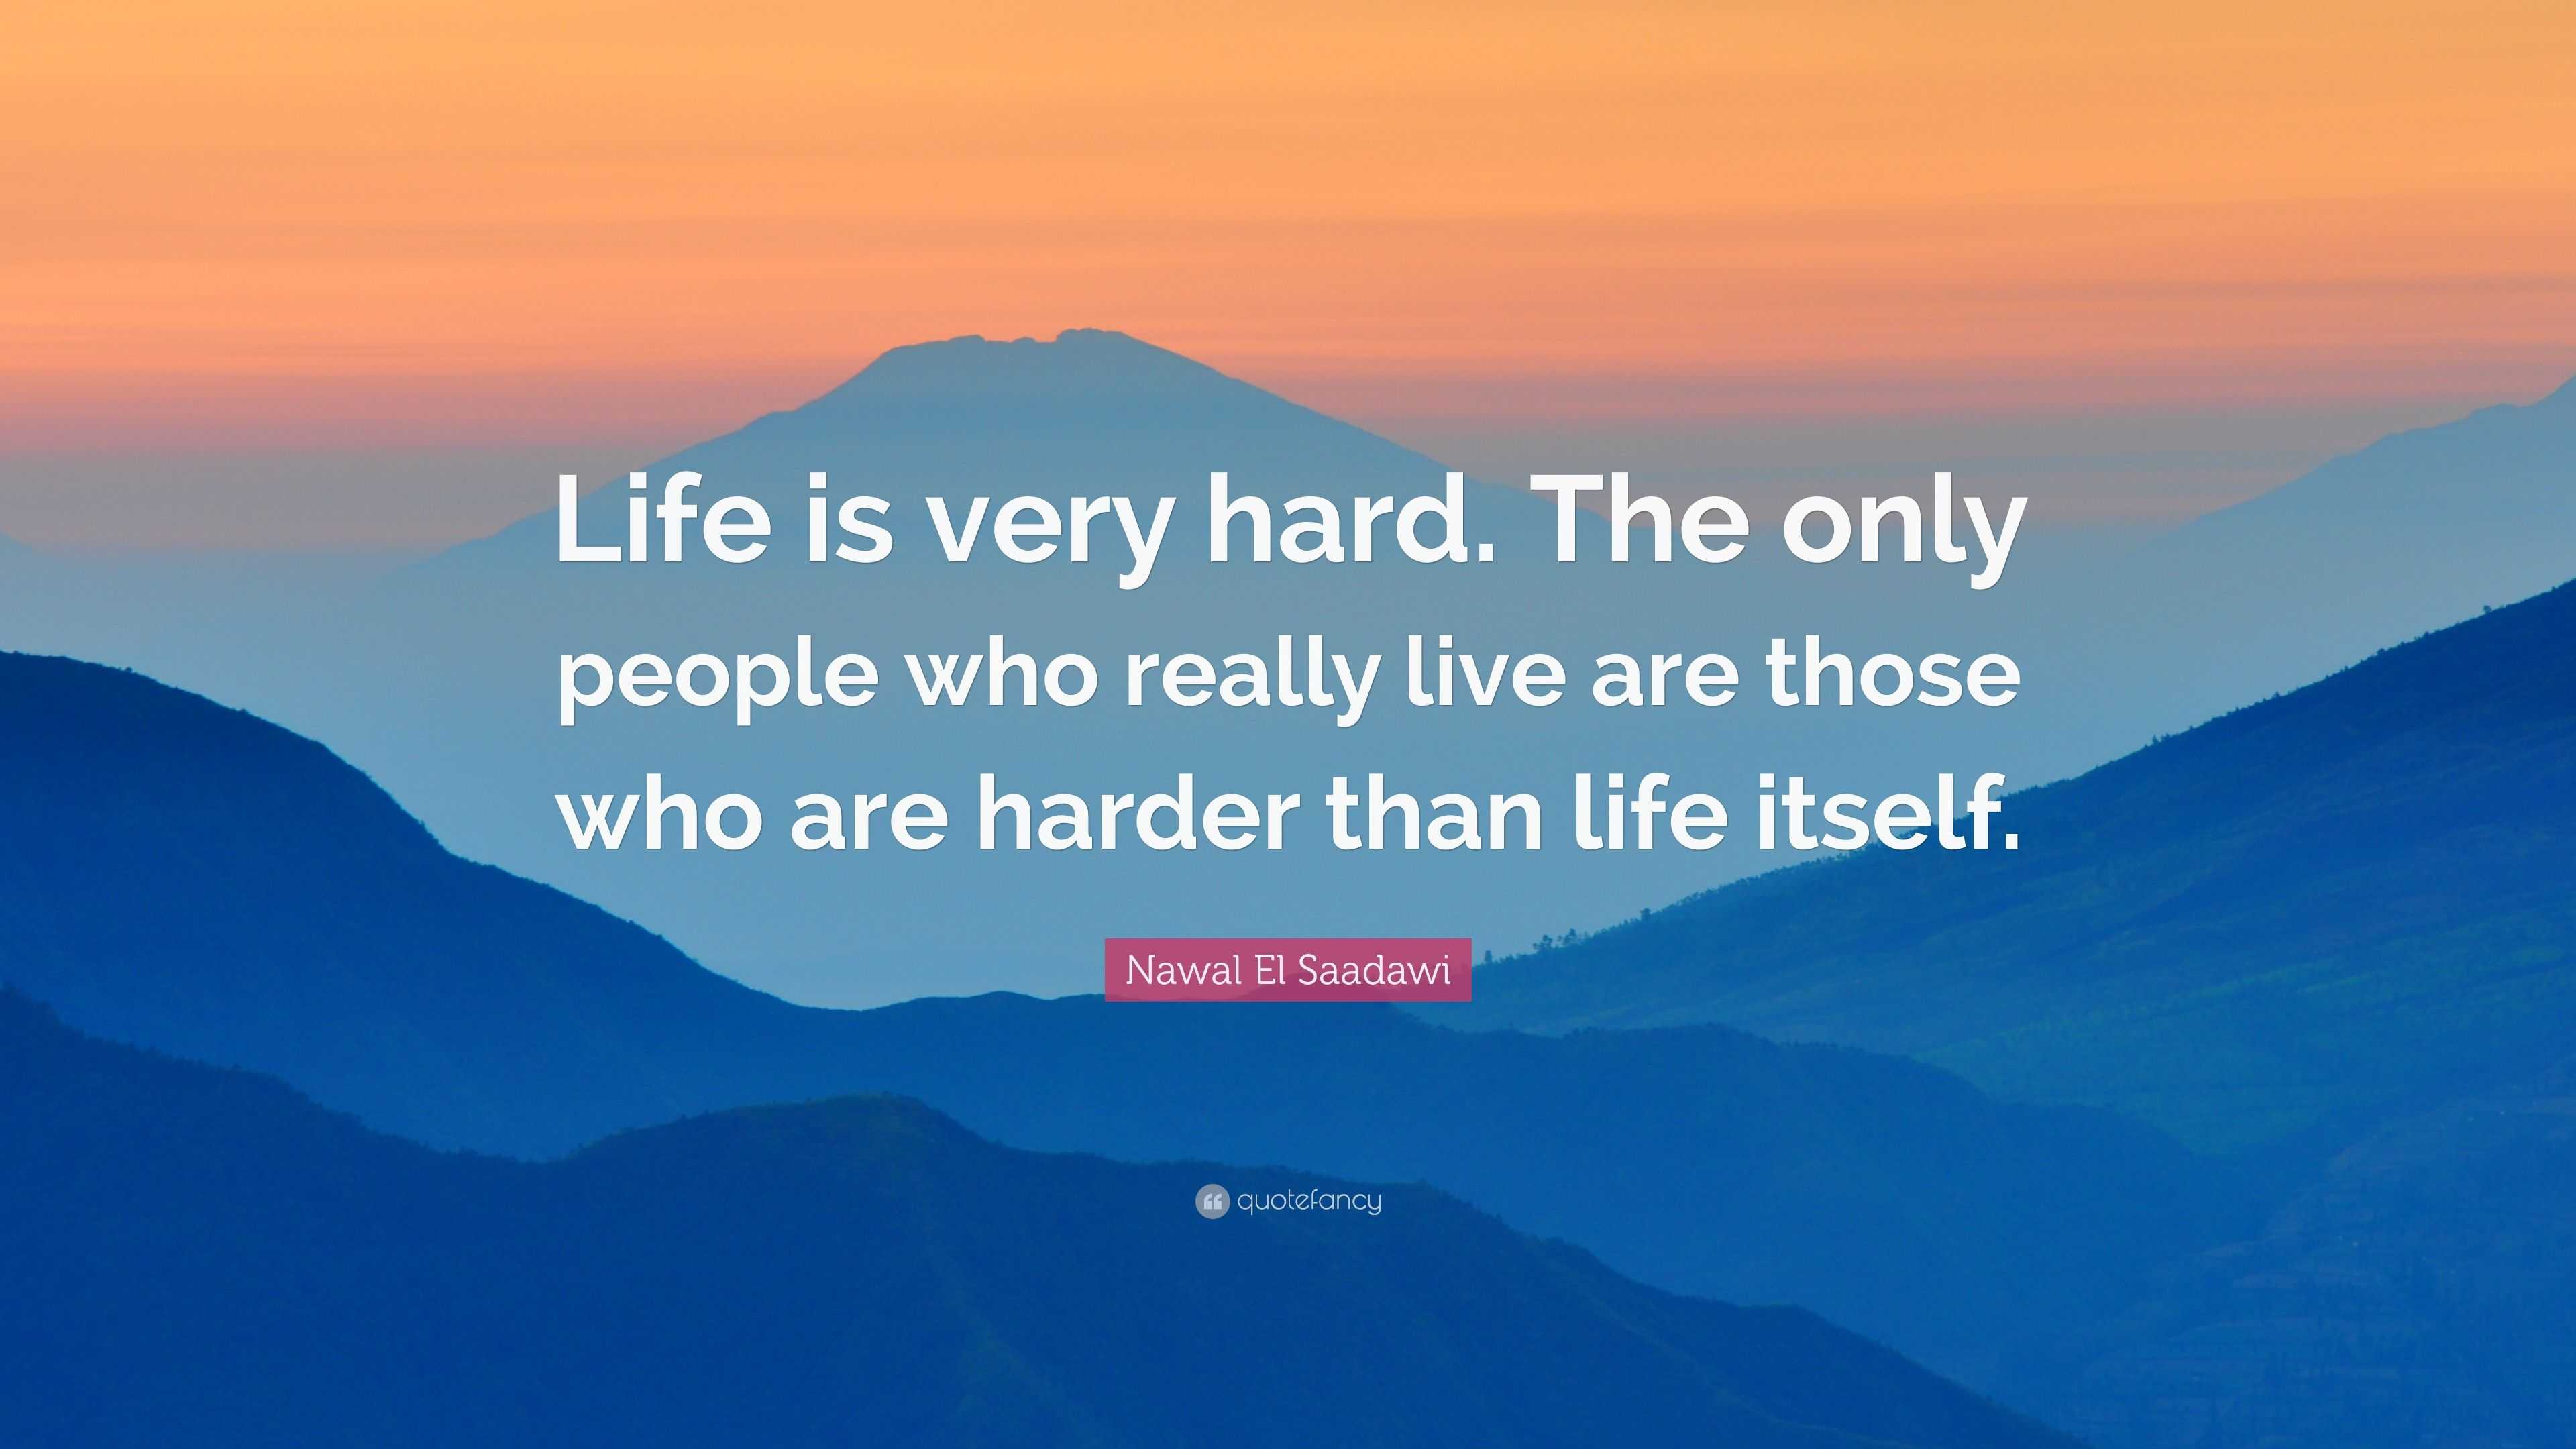 Nawal El Saadawi Quote: “Life is very hard. The only people who really ...